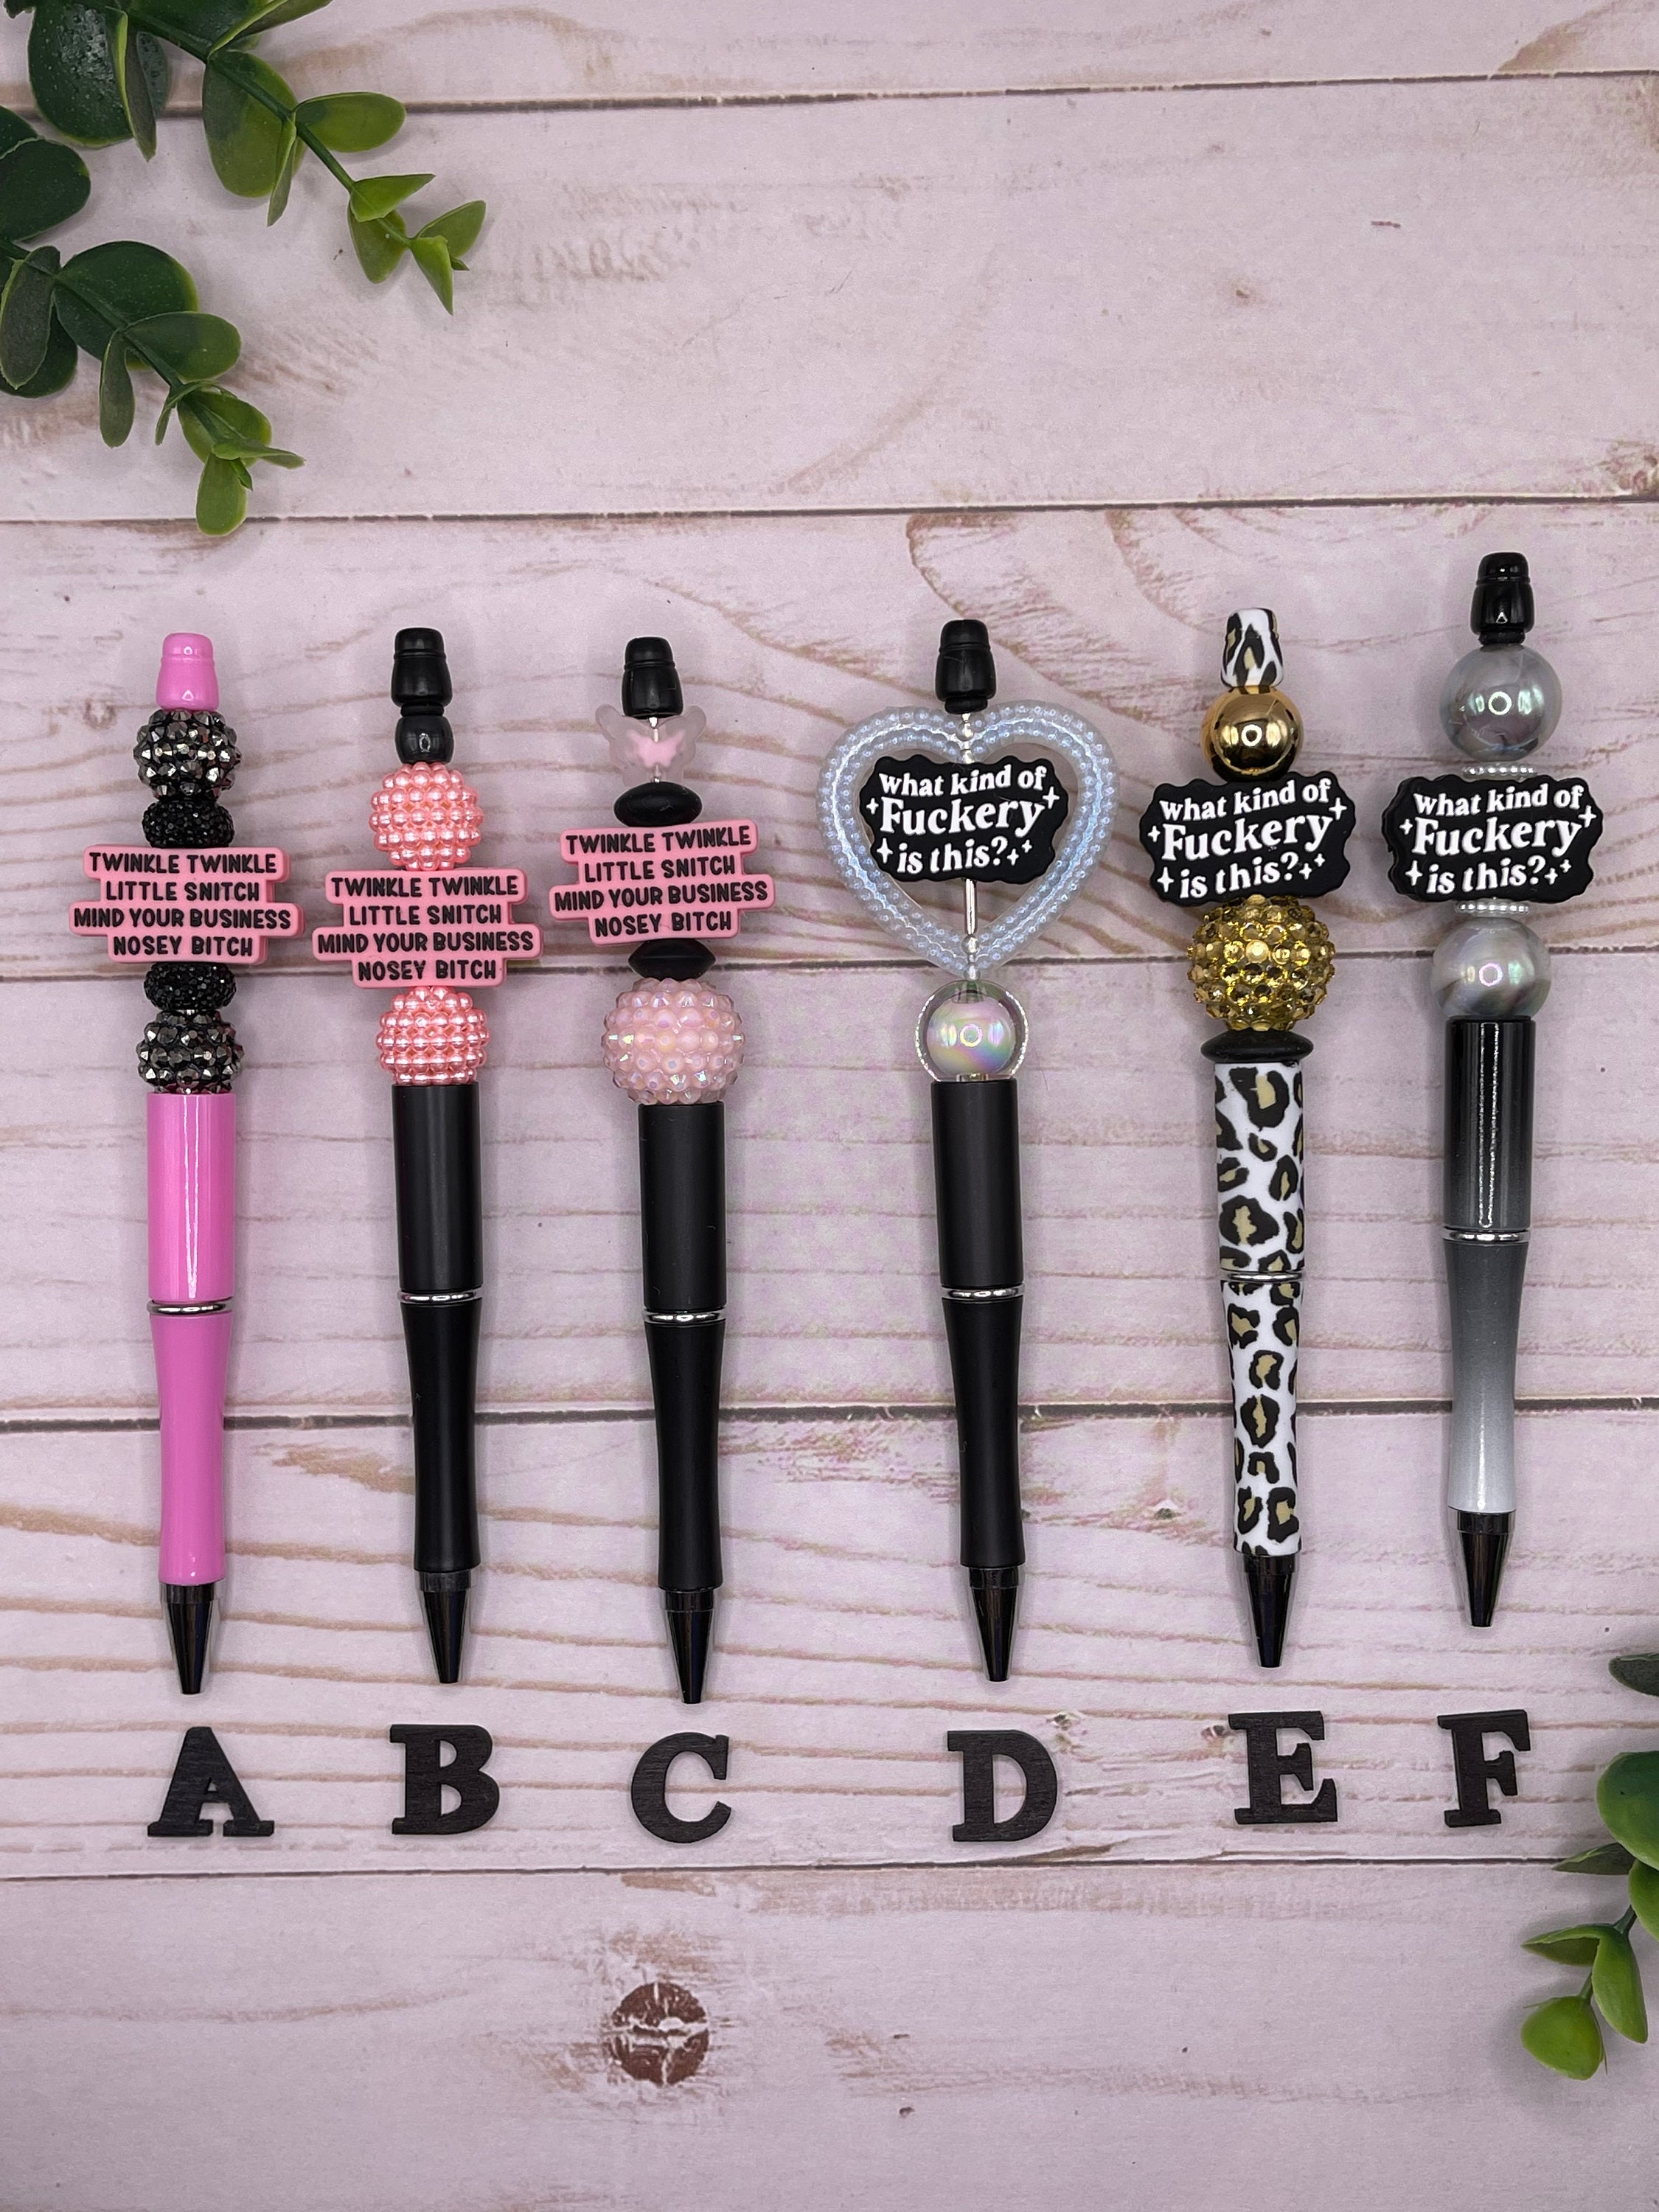 Petty, Petty Bitch Pencil Set in Lilac | Set of 5 Funny Sweary Profanity  Pencils